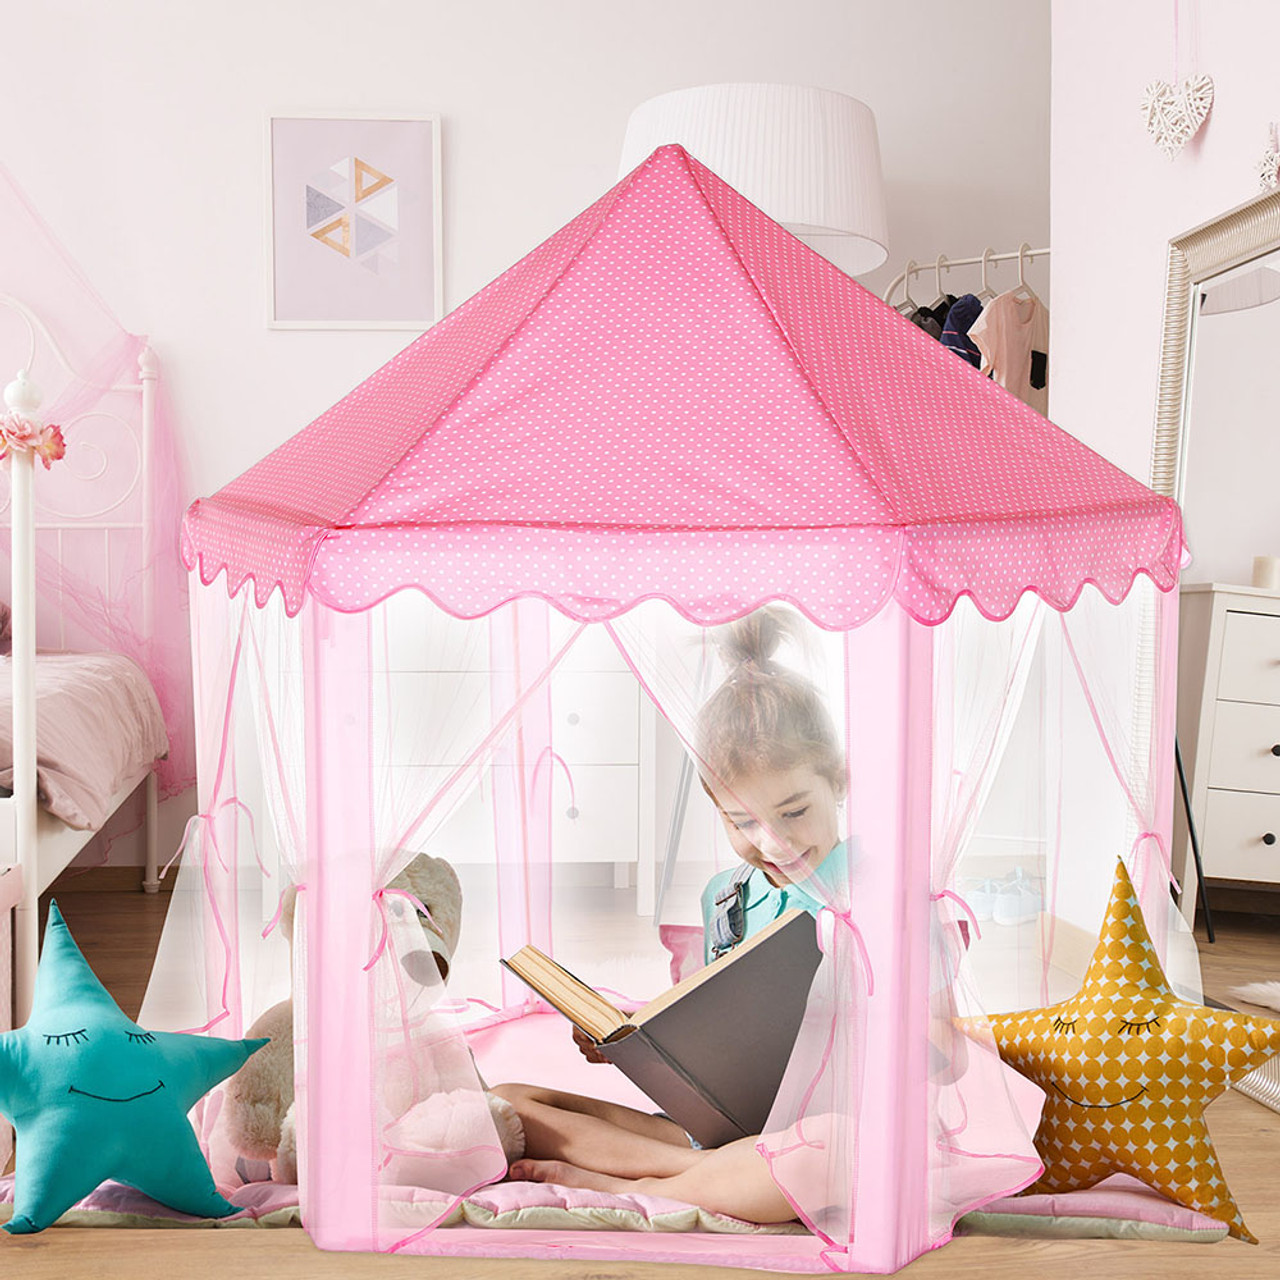 Kids' Dream Castle Play Tent with Storage Bag product image